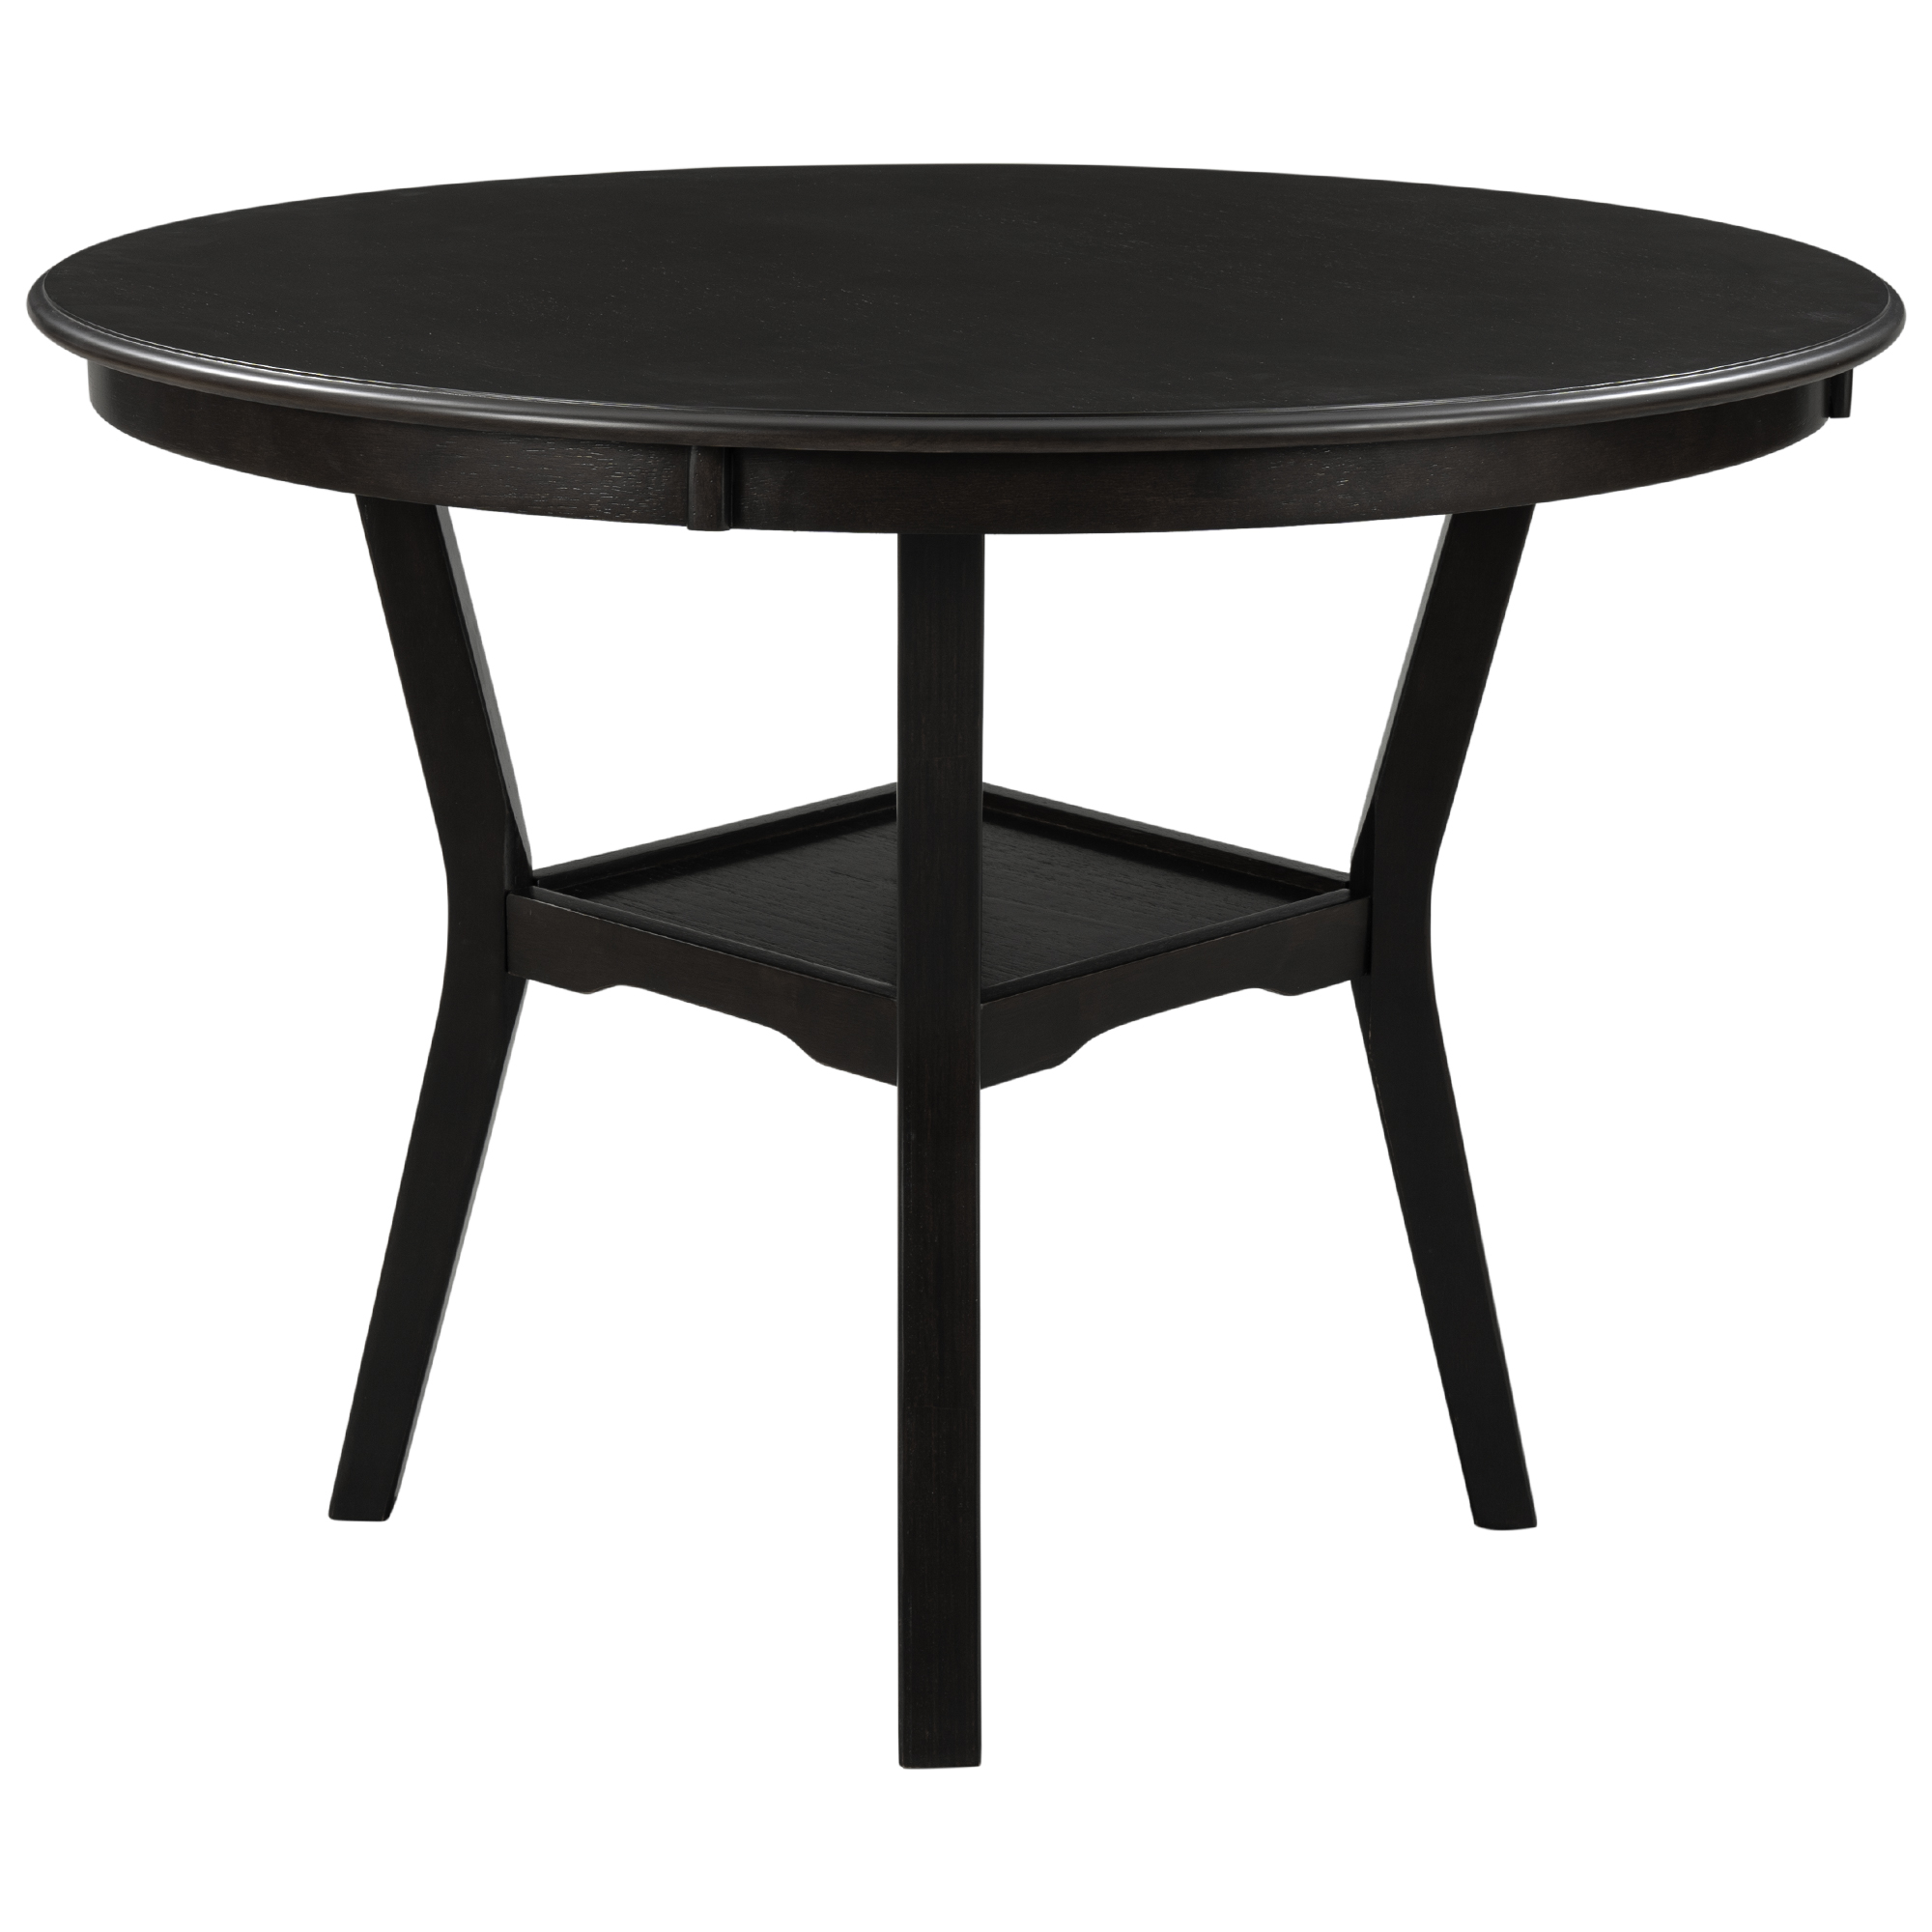 5-Piece Dining Table Set Round Table With Bottom Shelf, 4 Upholstered Chairs - ST000051AAP